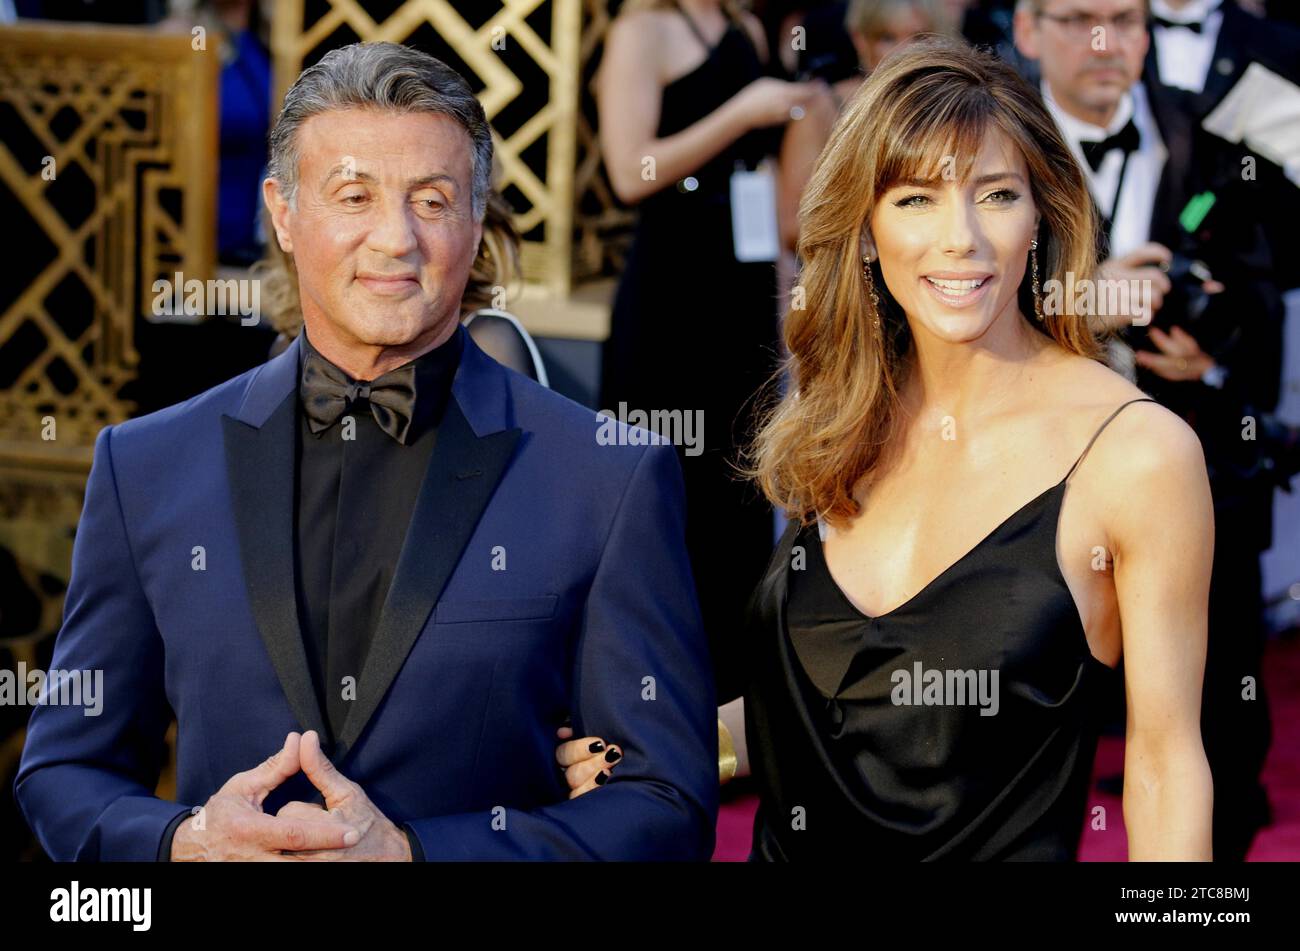 Sylvester Stallone and Jennifer Flavin at the 88th Annual Academy Awards held at the Hollywood Highland Center in Hollywood, USA on February 28, 2016 Stock Photo